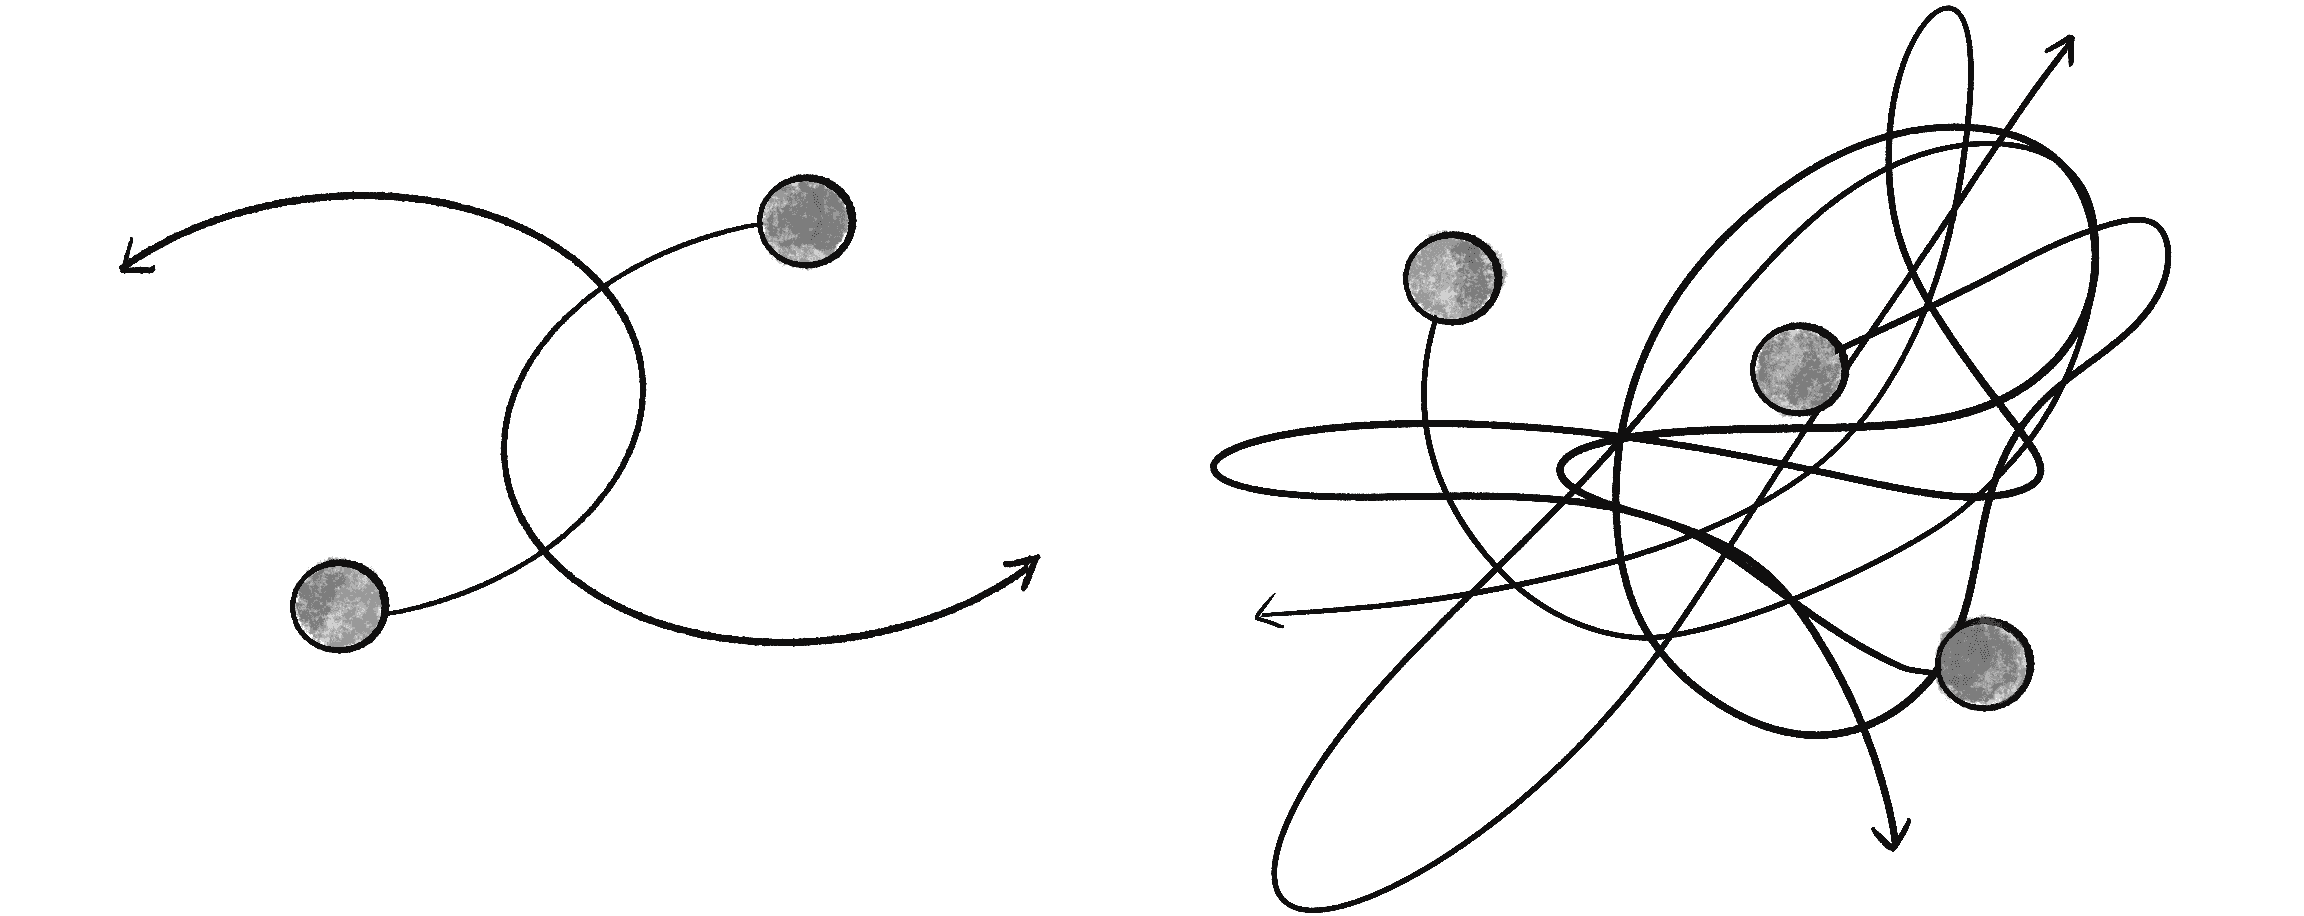 Figure 2.10: Example paths of the two-body (predictable) versus three-body (complex) problems